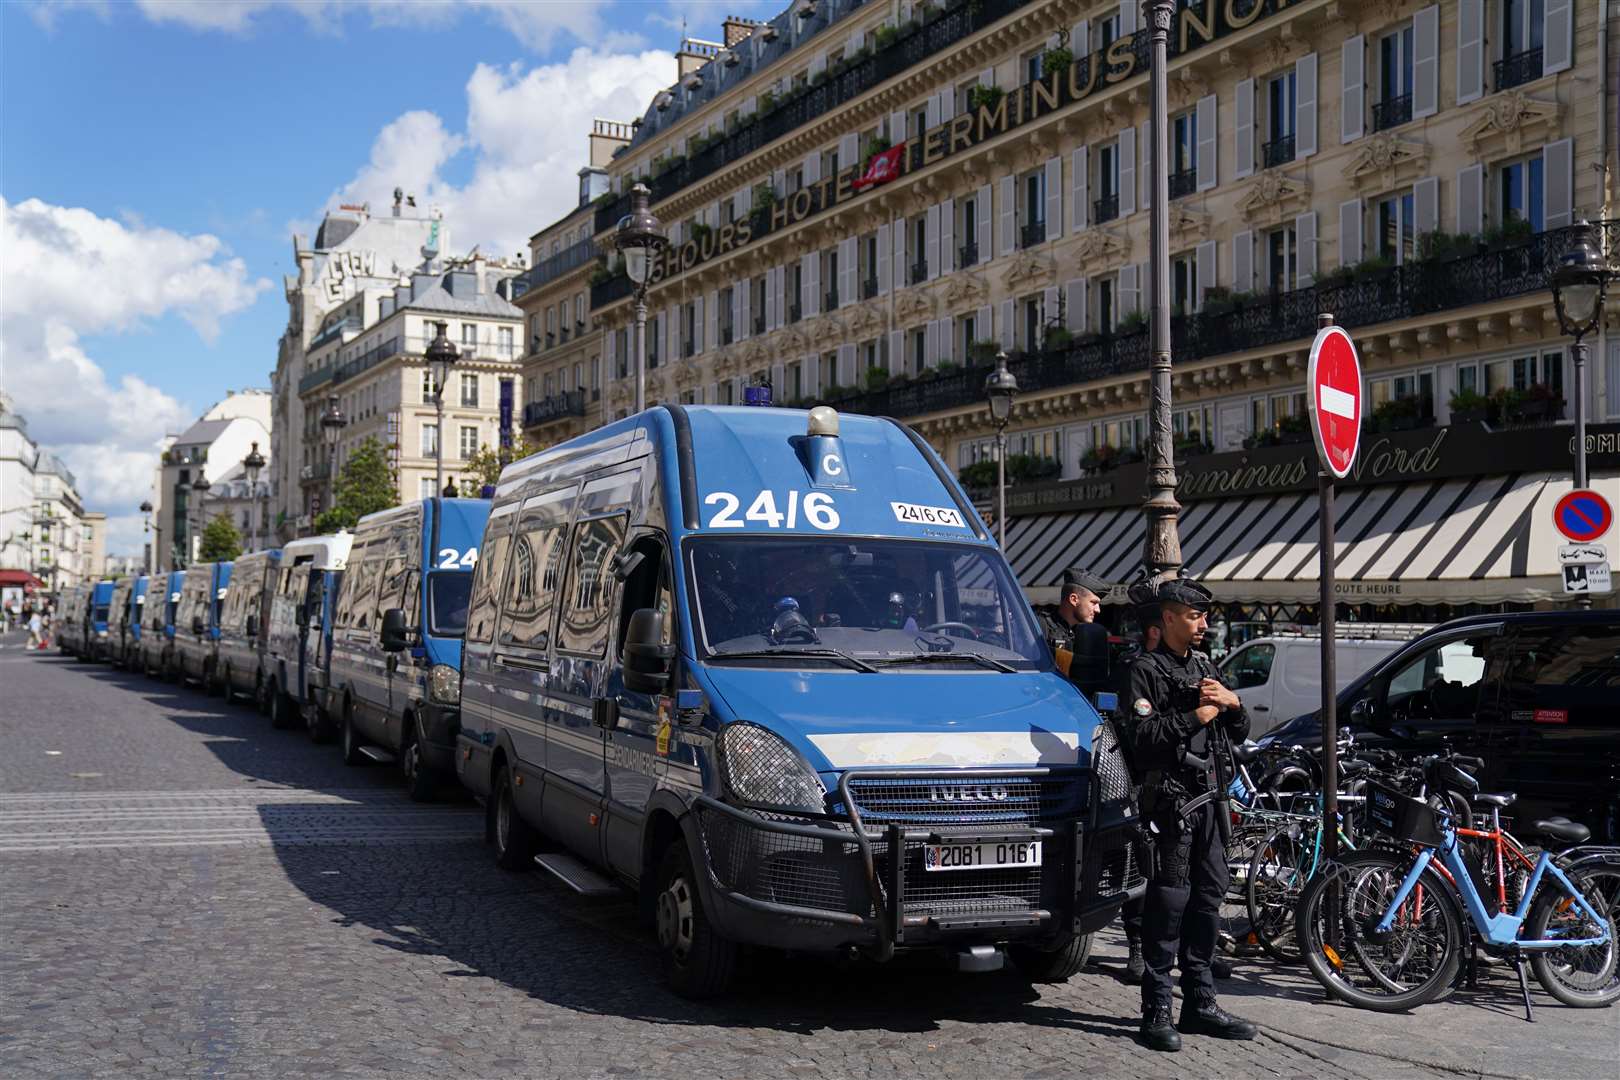 Police vehicles outside the Gare du Nord station (Jacob King/PA)